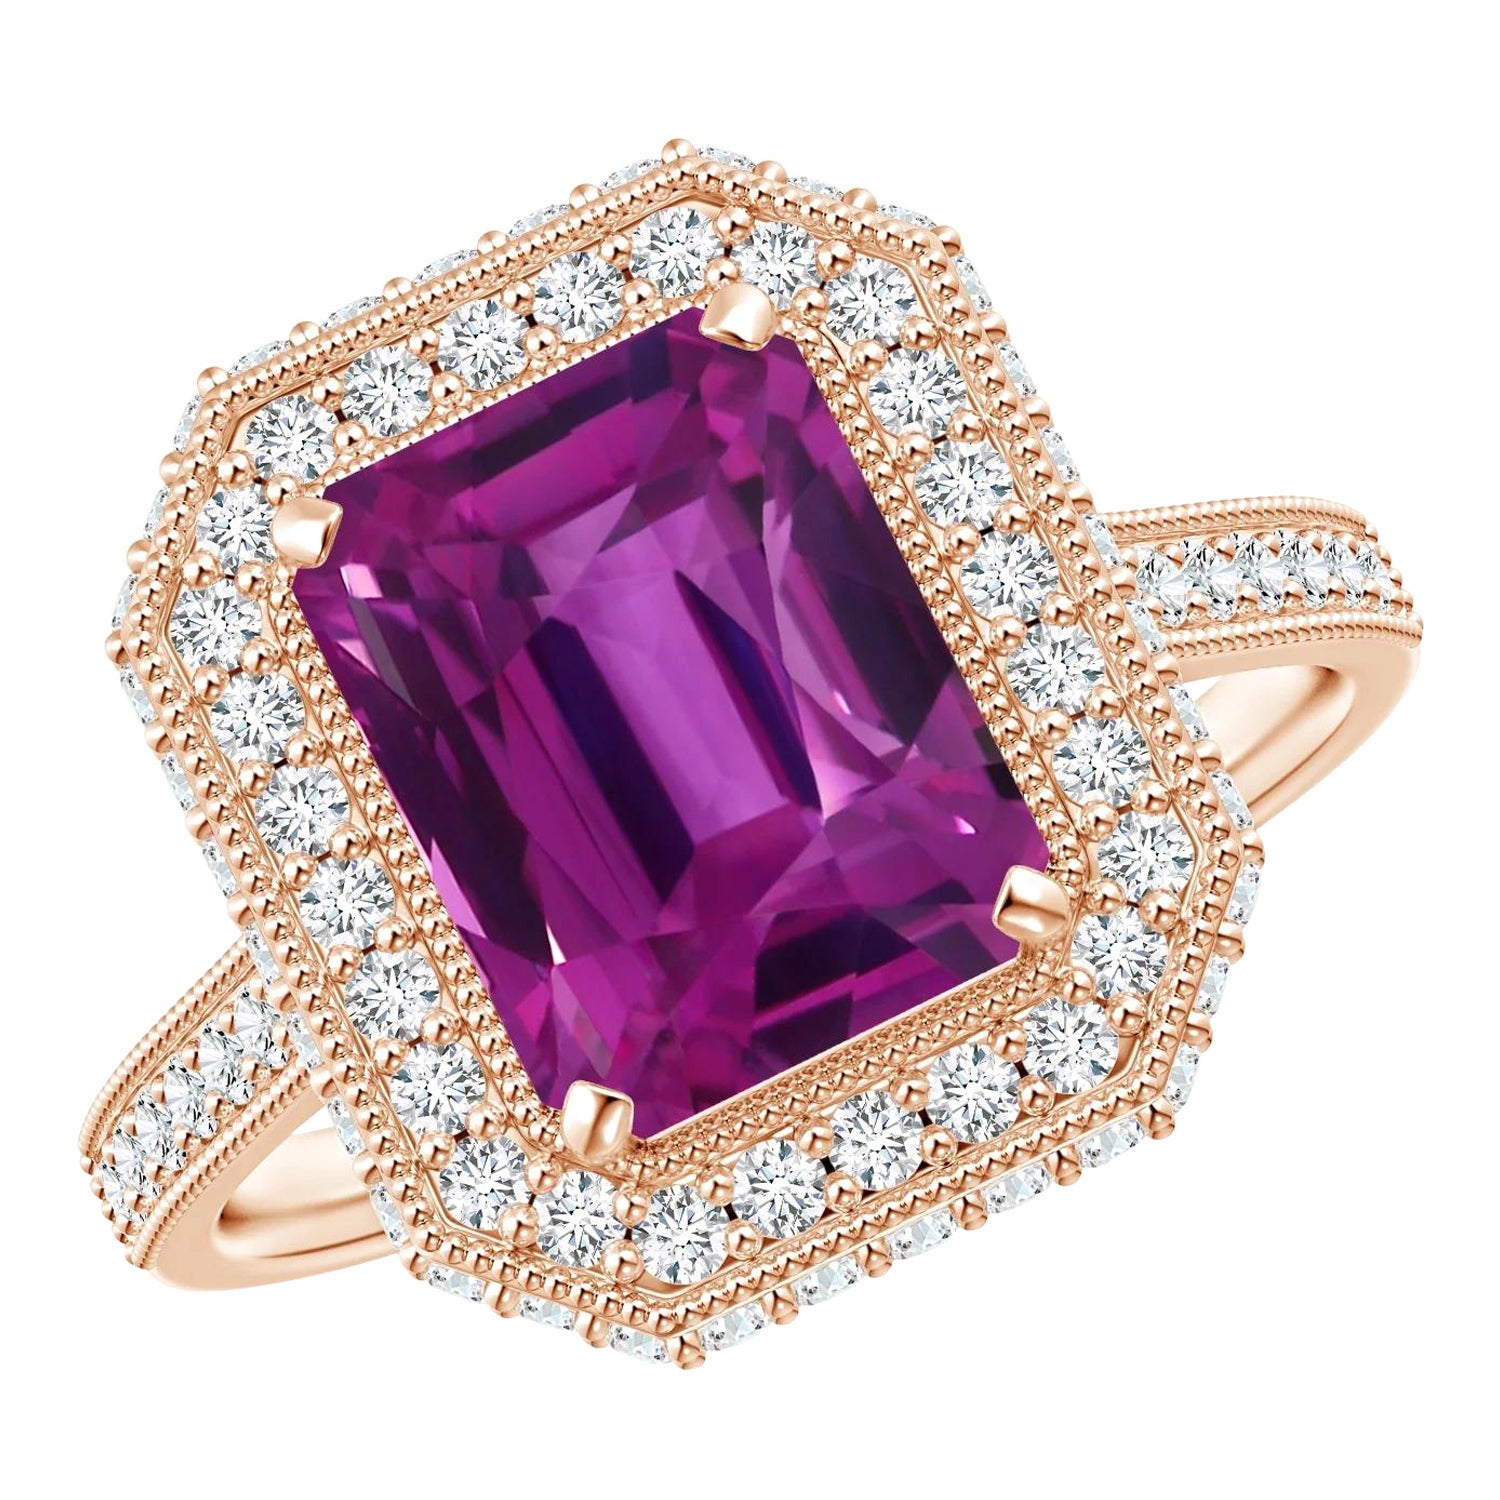 For Sale:  GIA Certified Natural Emerald Cut Pink Sapphire Halo Ring in Rose Gold